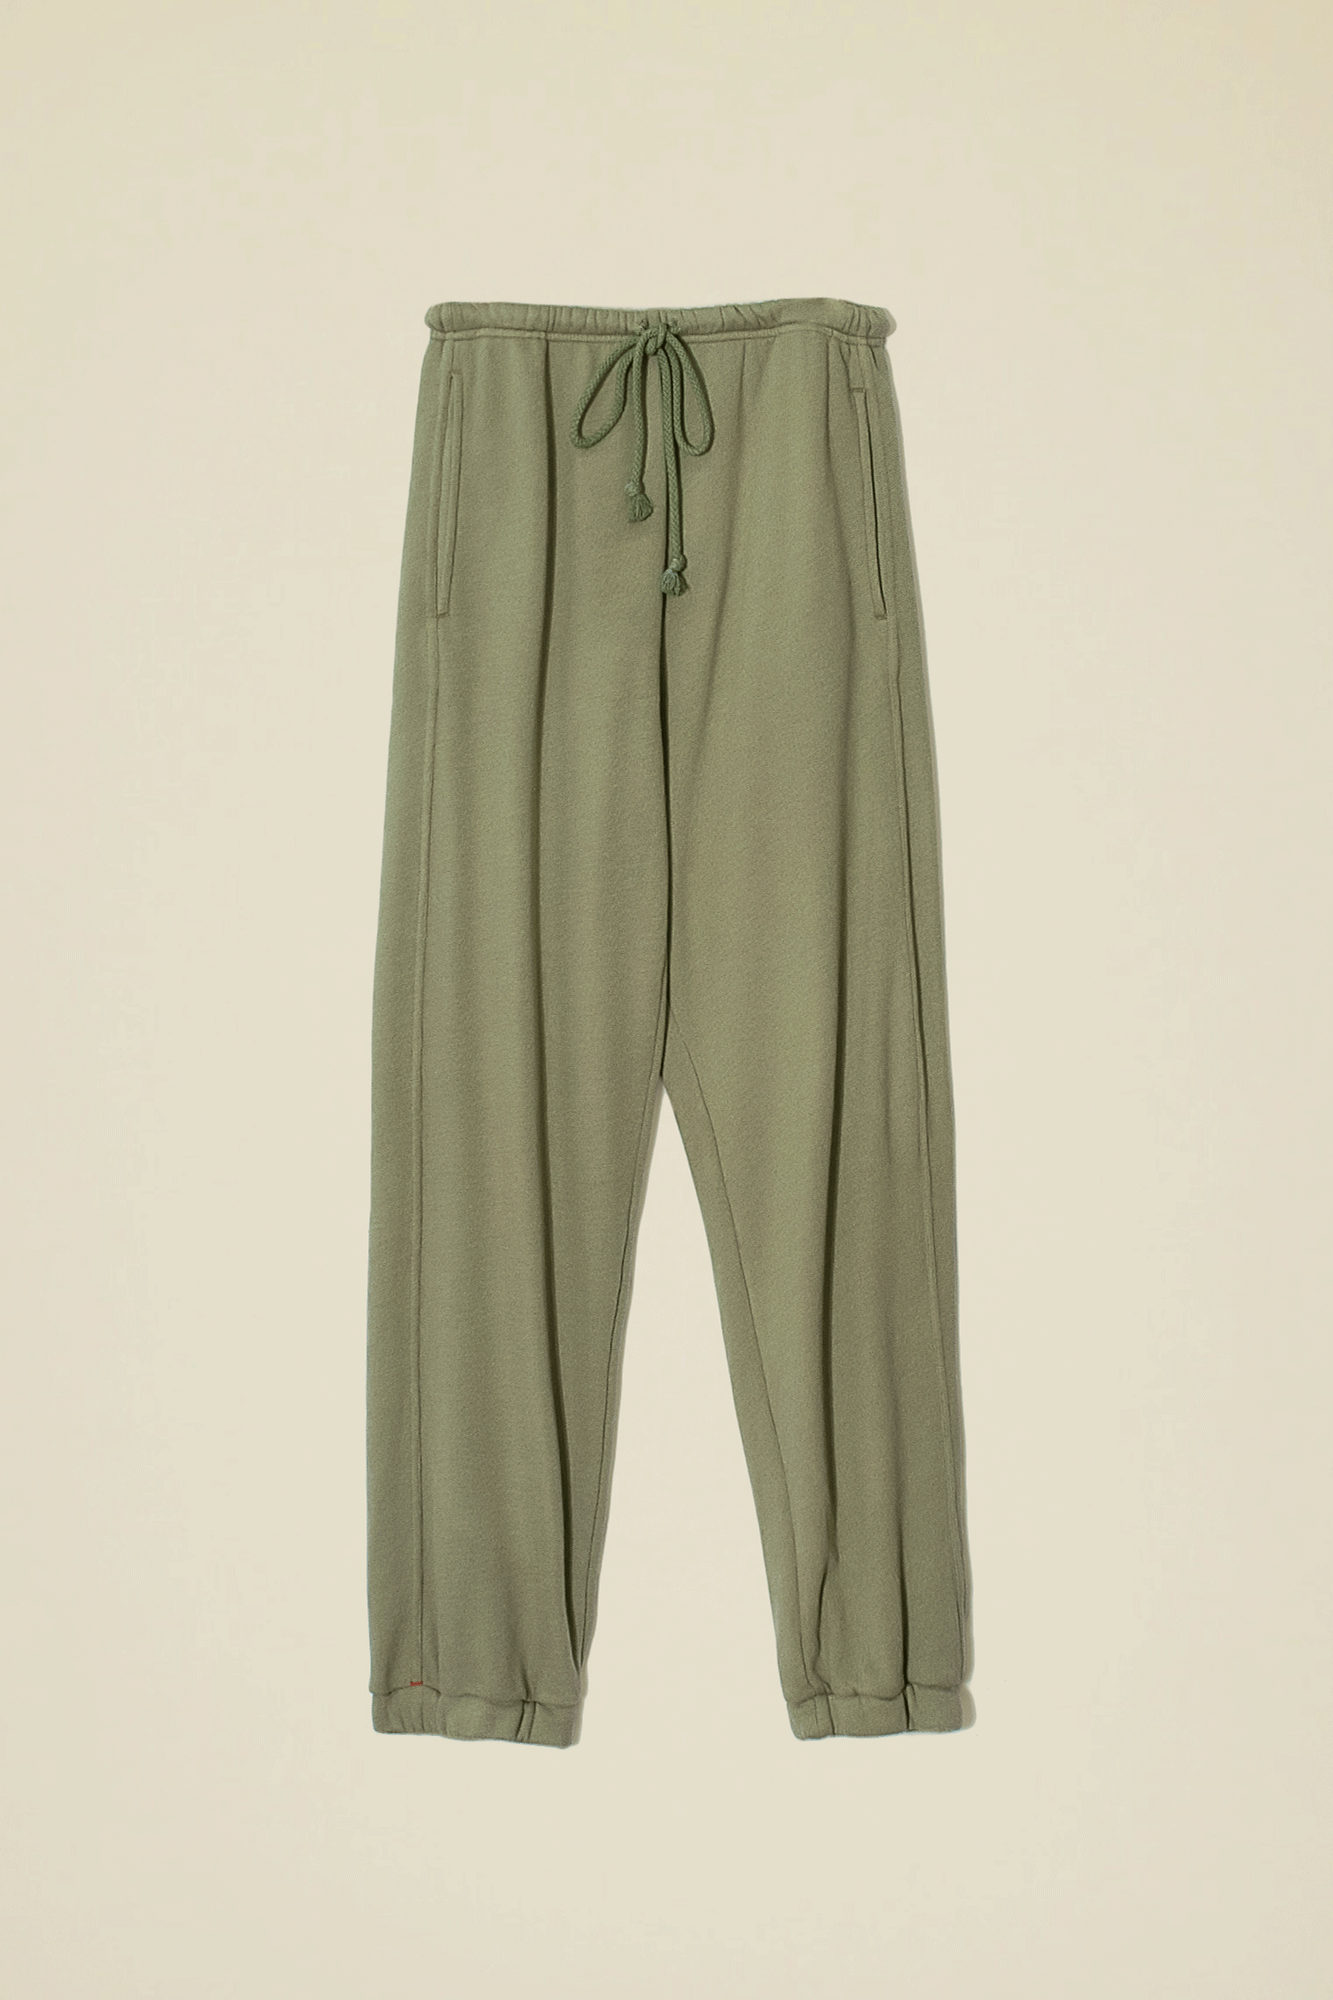 The Devi Sweatpant is an ultra-soft fleece pant from Xirena designed to offer maximum coziness and comfort. It features a drawstring waist and elasticized cuffs for an adjustable fit plus side seam pockets for convenience. No matter the occasion, Devi lets you make an effortless, cozy statement.